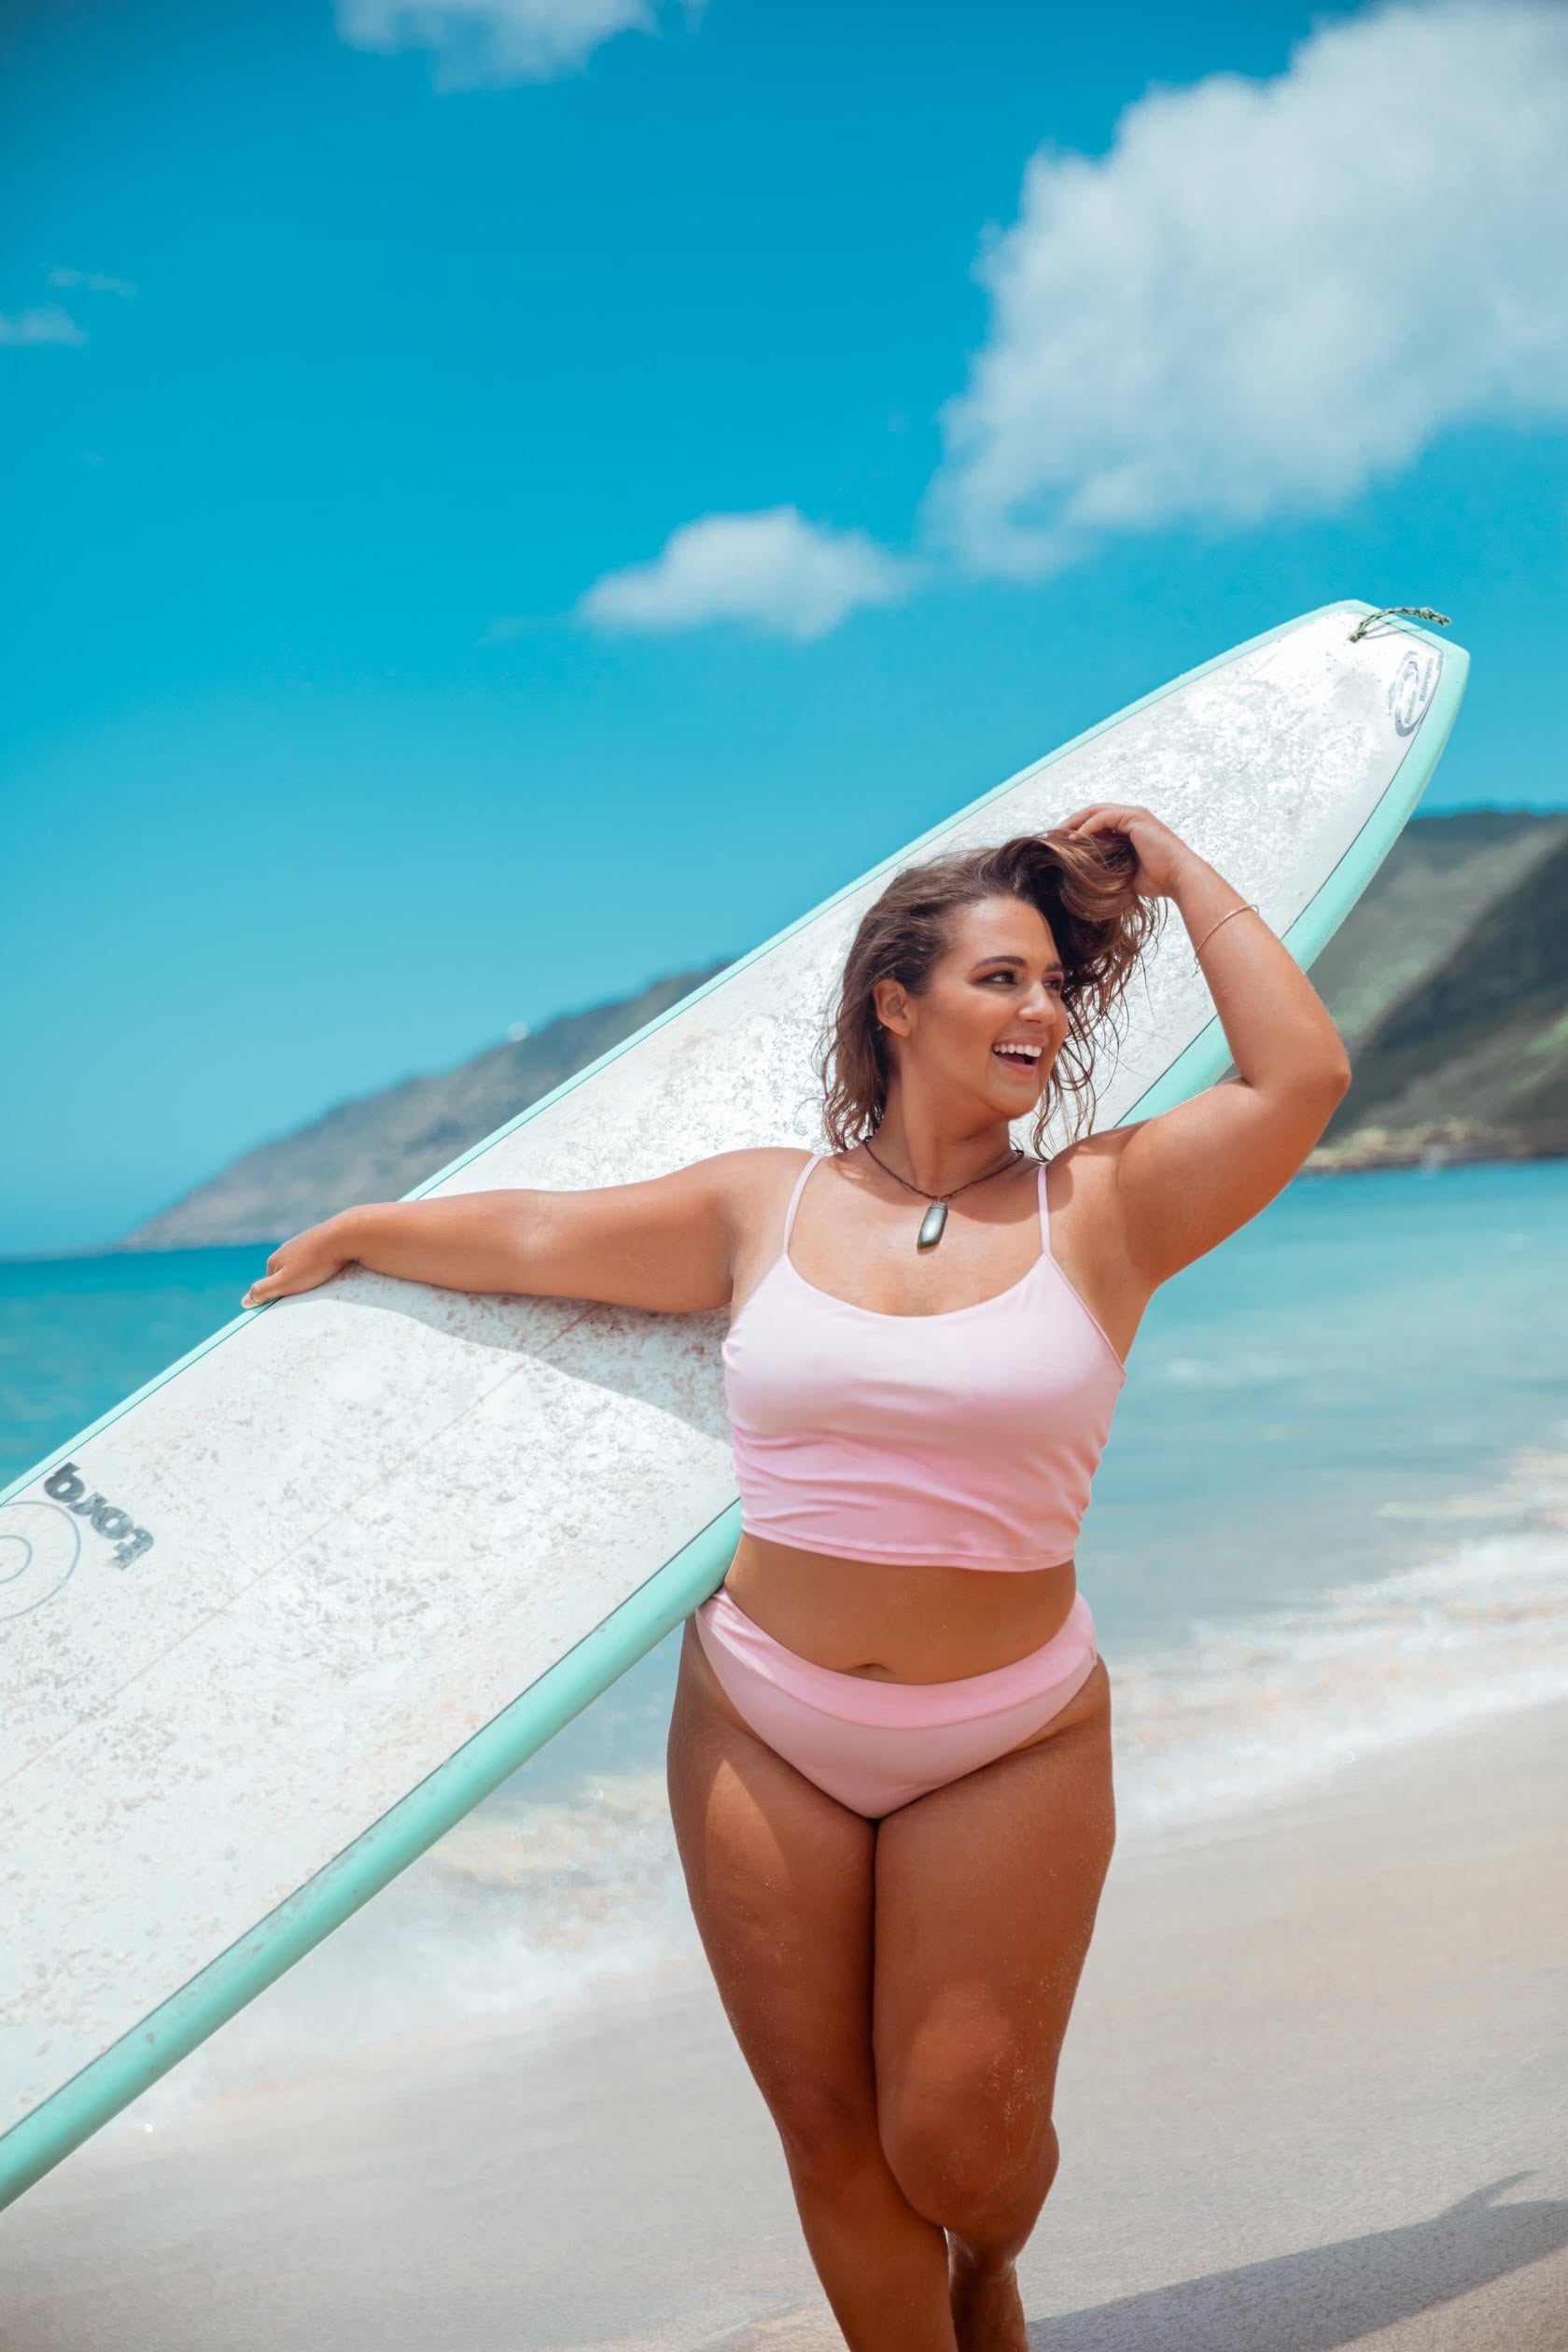 Meet Curvy Surfer Girl, The Movement Making Waves For Plus-Size Athletes